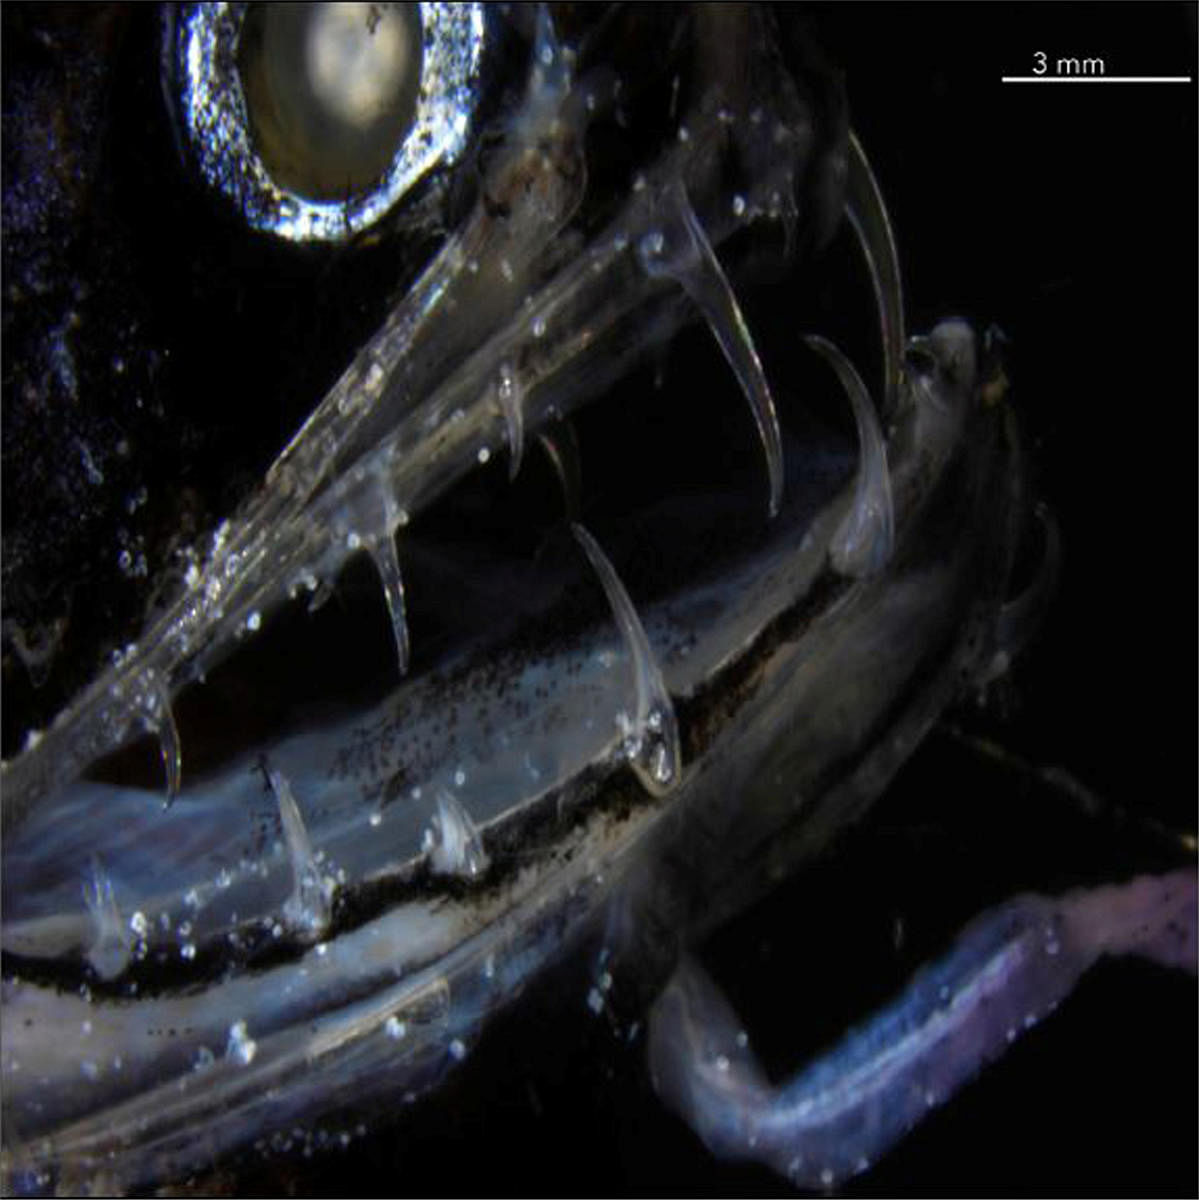 The transparent teeth of the deep-sea dragonfish are shown in this photograph released from San Diego, California, US. Reuters photo